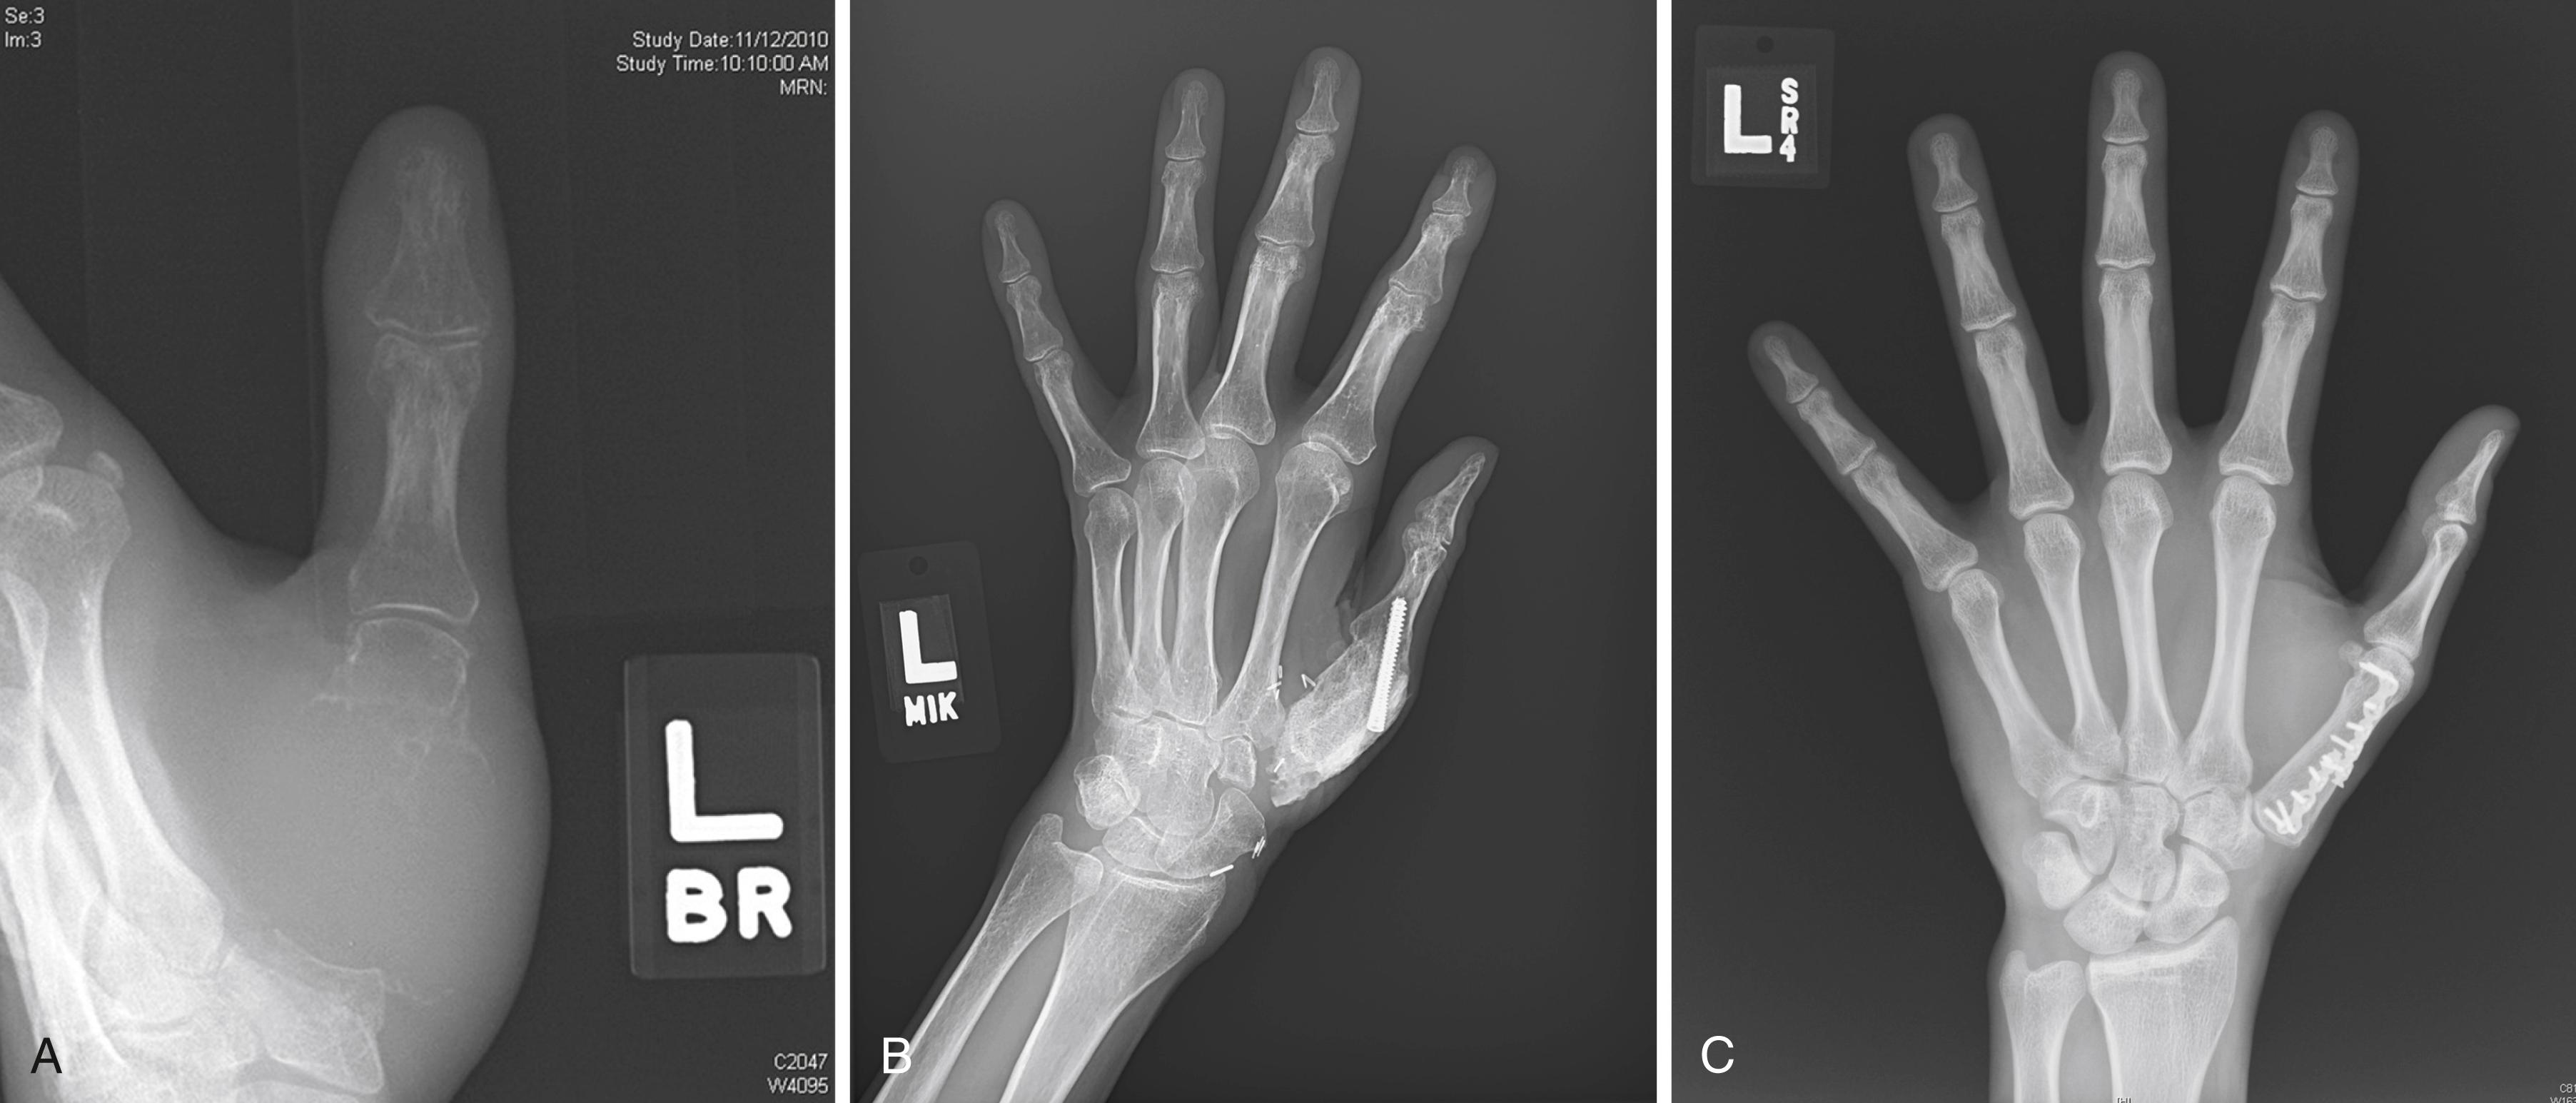 Fig. 59.6, A, A grade 3 giant cell tumor (GCT) of the thumb metacarpal is treated with wide extraarticular resection including the trapezium and base of the proximal phalanx. B, Thumb metacarpal is reconstructed with a large iliac crest graft with metacarpophalangeal joint arthrodesis and proximal suspension. C, Long-term follow-up of diaphyseal segment reconstruction using iliac crest bone graft for a grade 2 chondrosarcoma. Small blade plates facilitate internal fixation of small periarticular fragments.